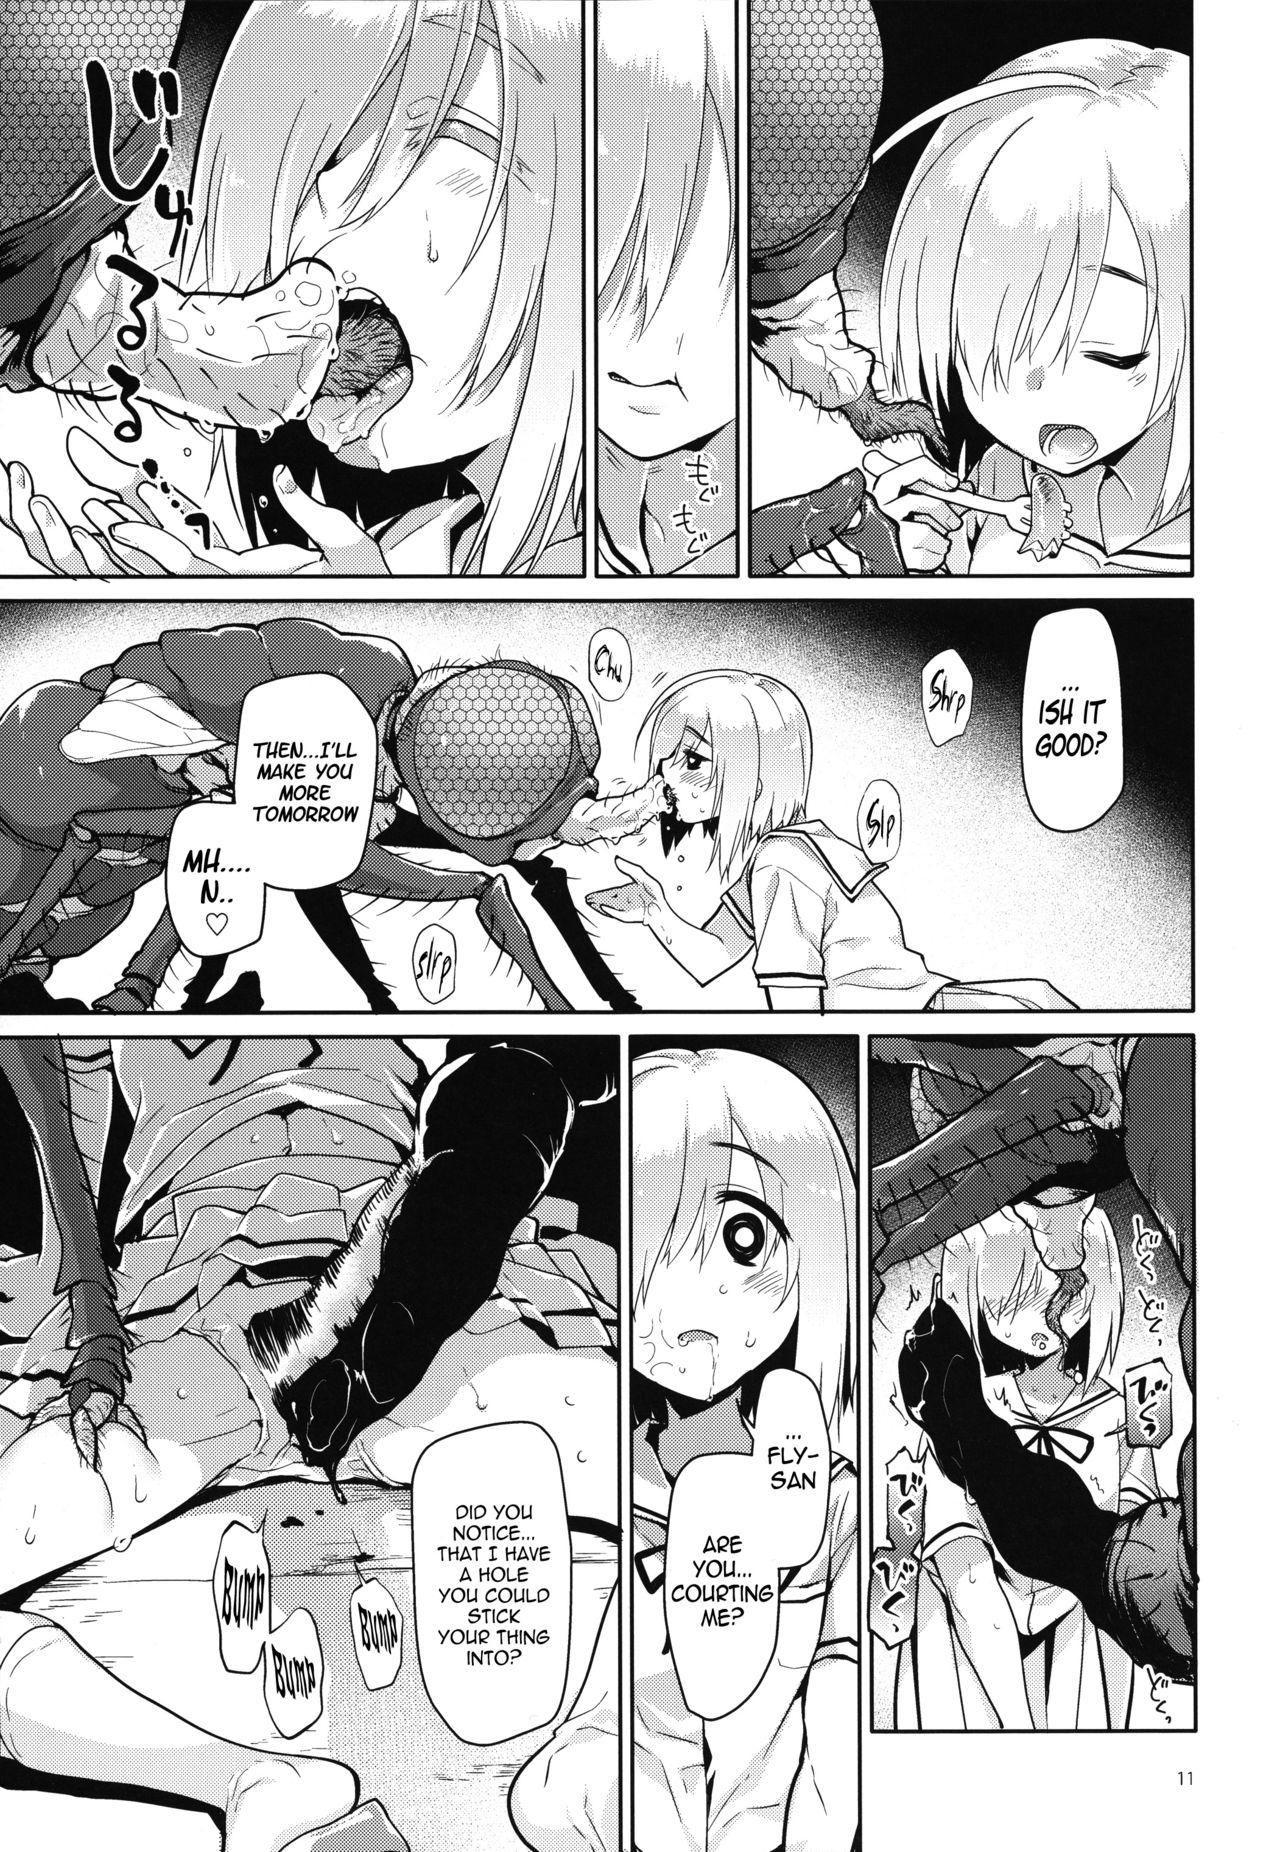 Pica Uchuujin no Ie - Home of alien Casting - Page 10